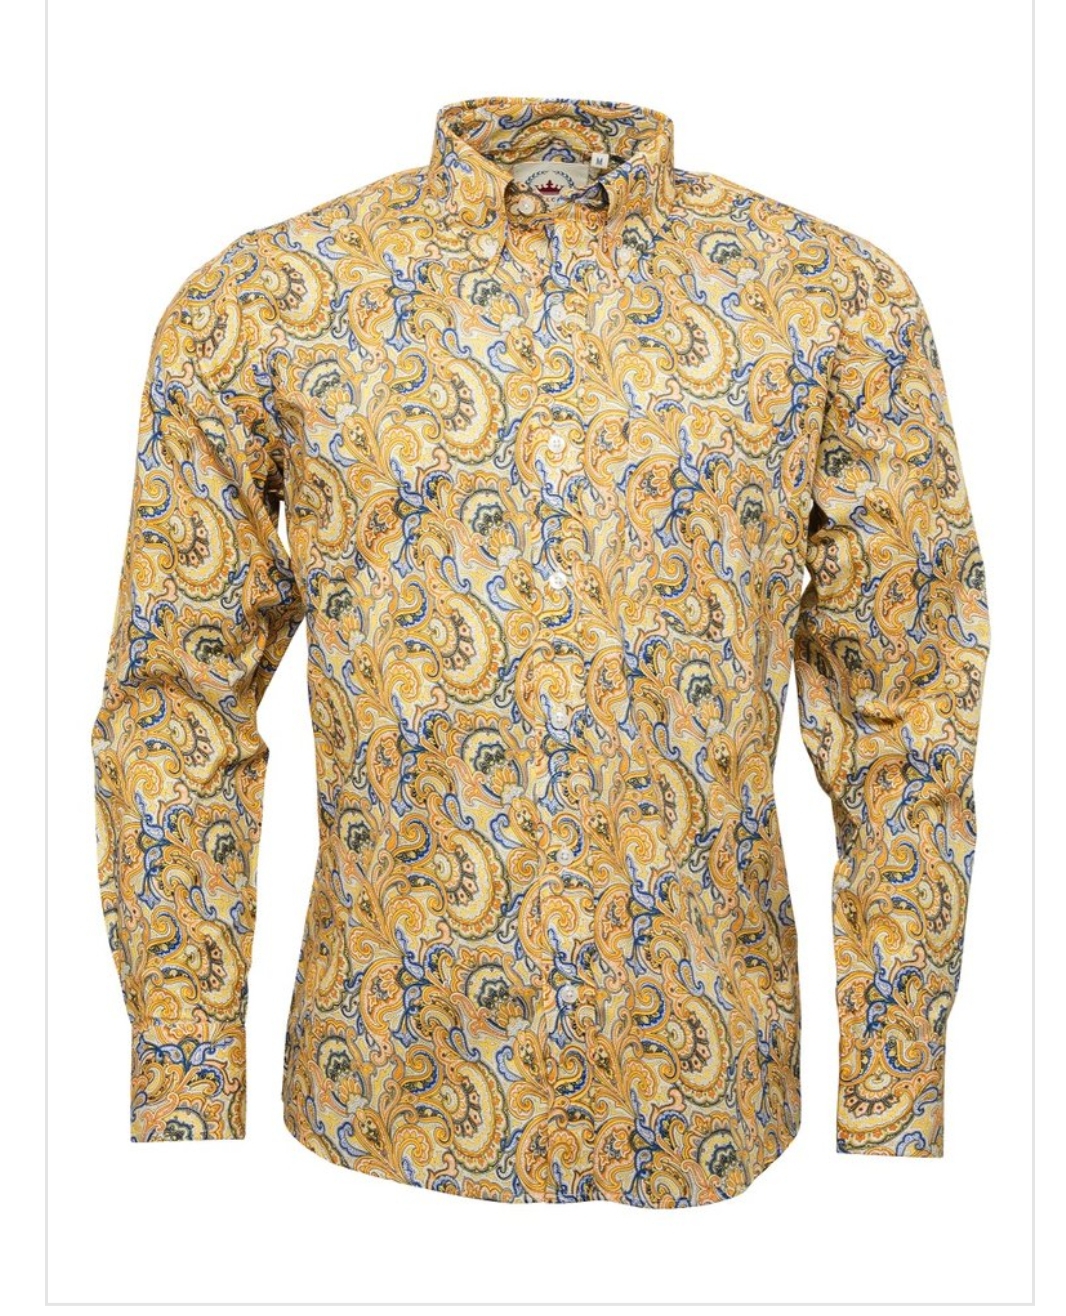 Relco Long Sleeve Mustard Paisley Button Down Shirt. - Shirts And Things